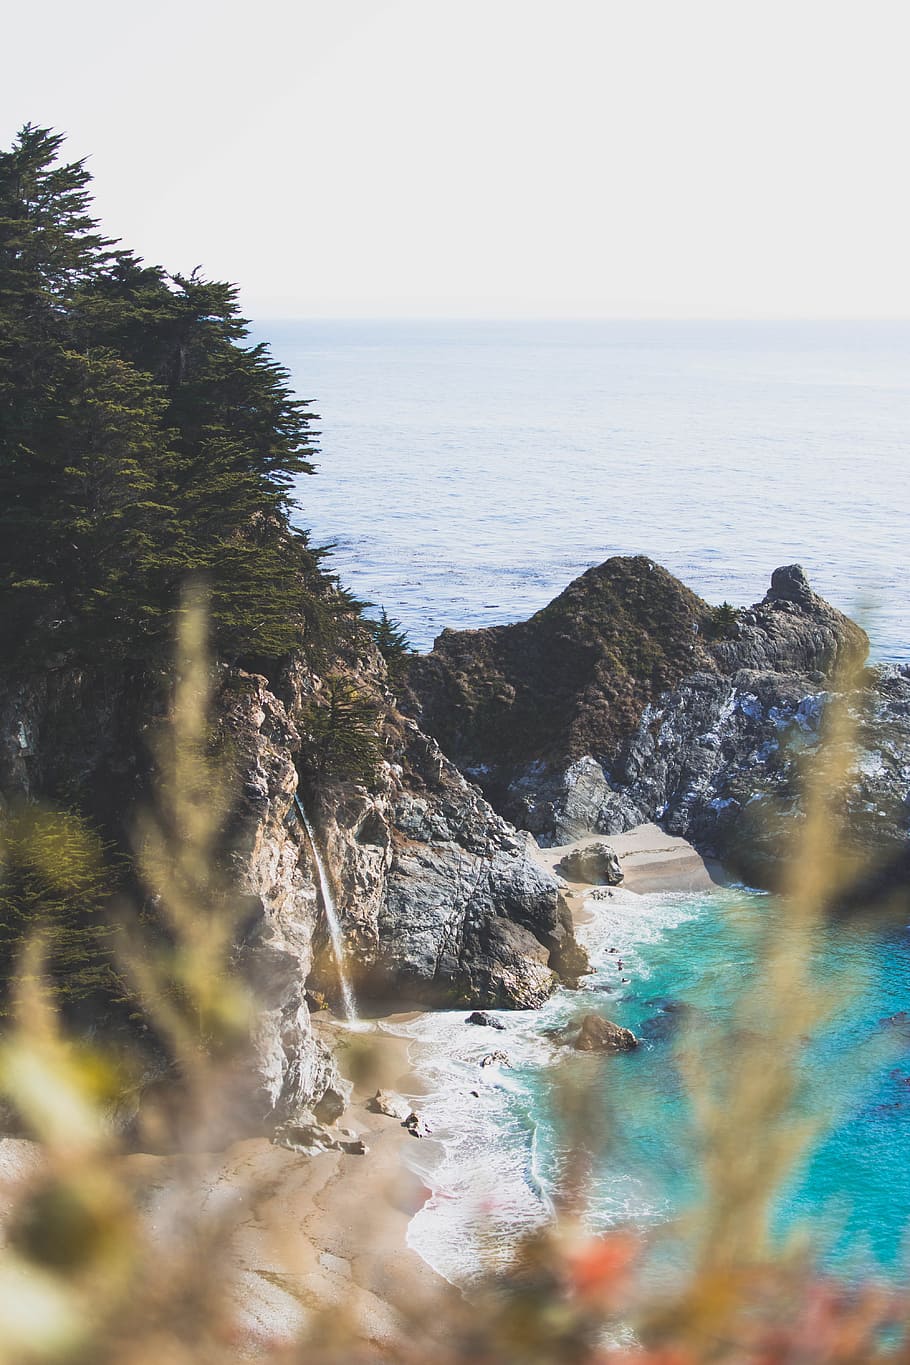 photograph of beach, cliff, water, sea, ocean, tree, forest, woodland